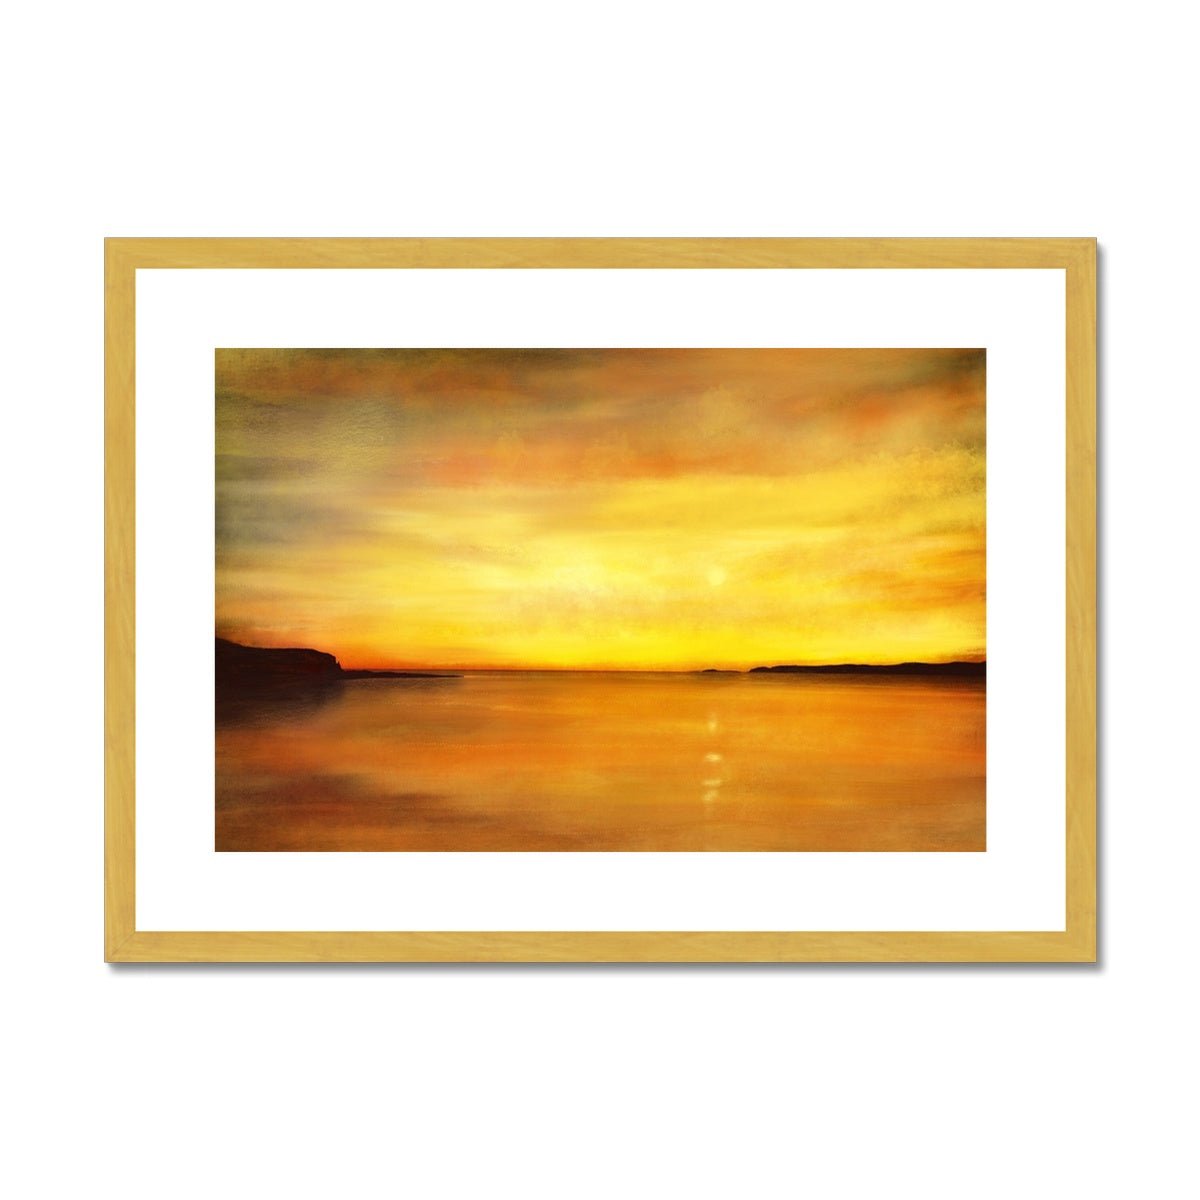 King's Cave Sunset Arran Painting | Antique Framed & Mounted Prints From Scotland-Antique Framed & Mounted Prints-Arran Art Gallery-A2 Landscape-Gold Frame-Paintings, Prints, Homeware, Art Gifts From Scotland By Scottish Artist Kevin Hunter